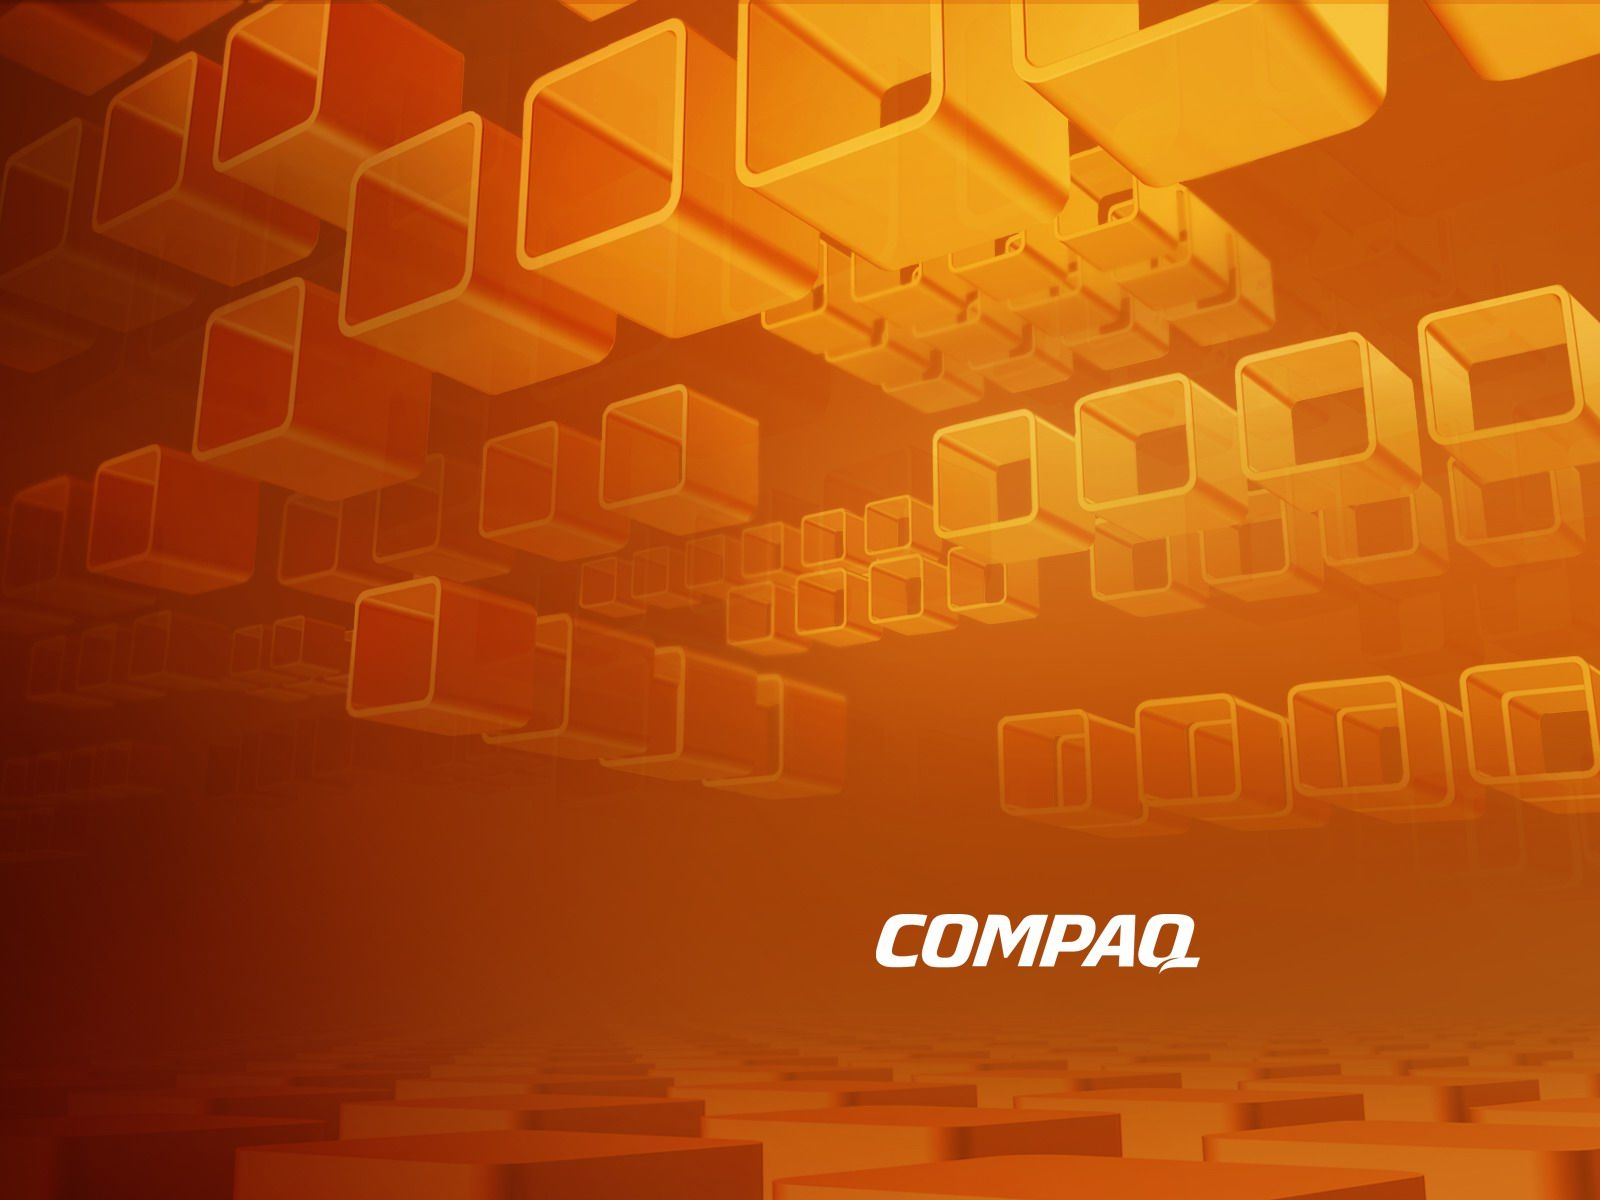 Compaq HD Wallpapers HD Backgrounds